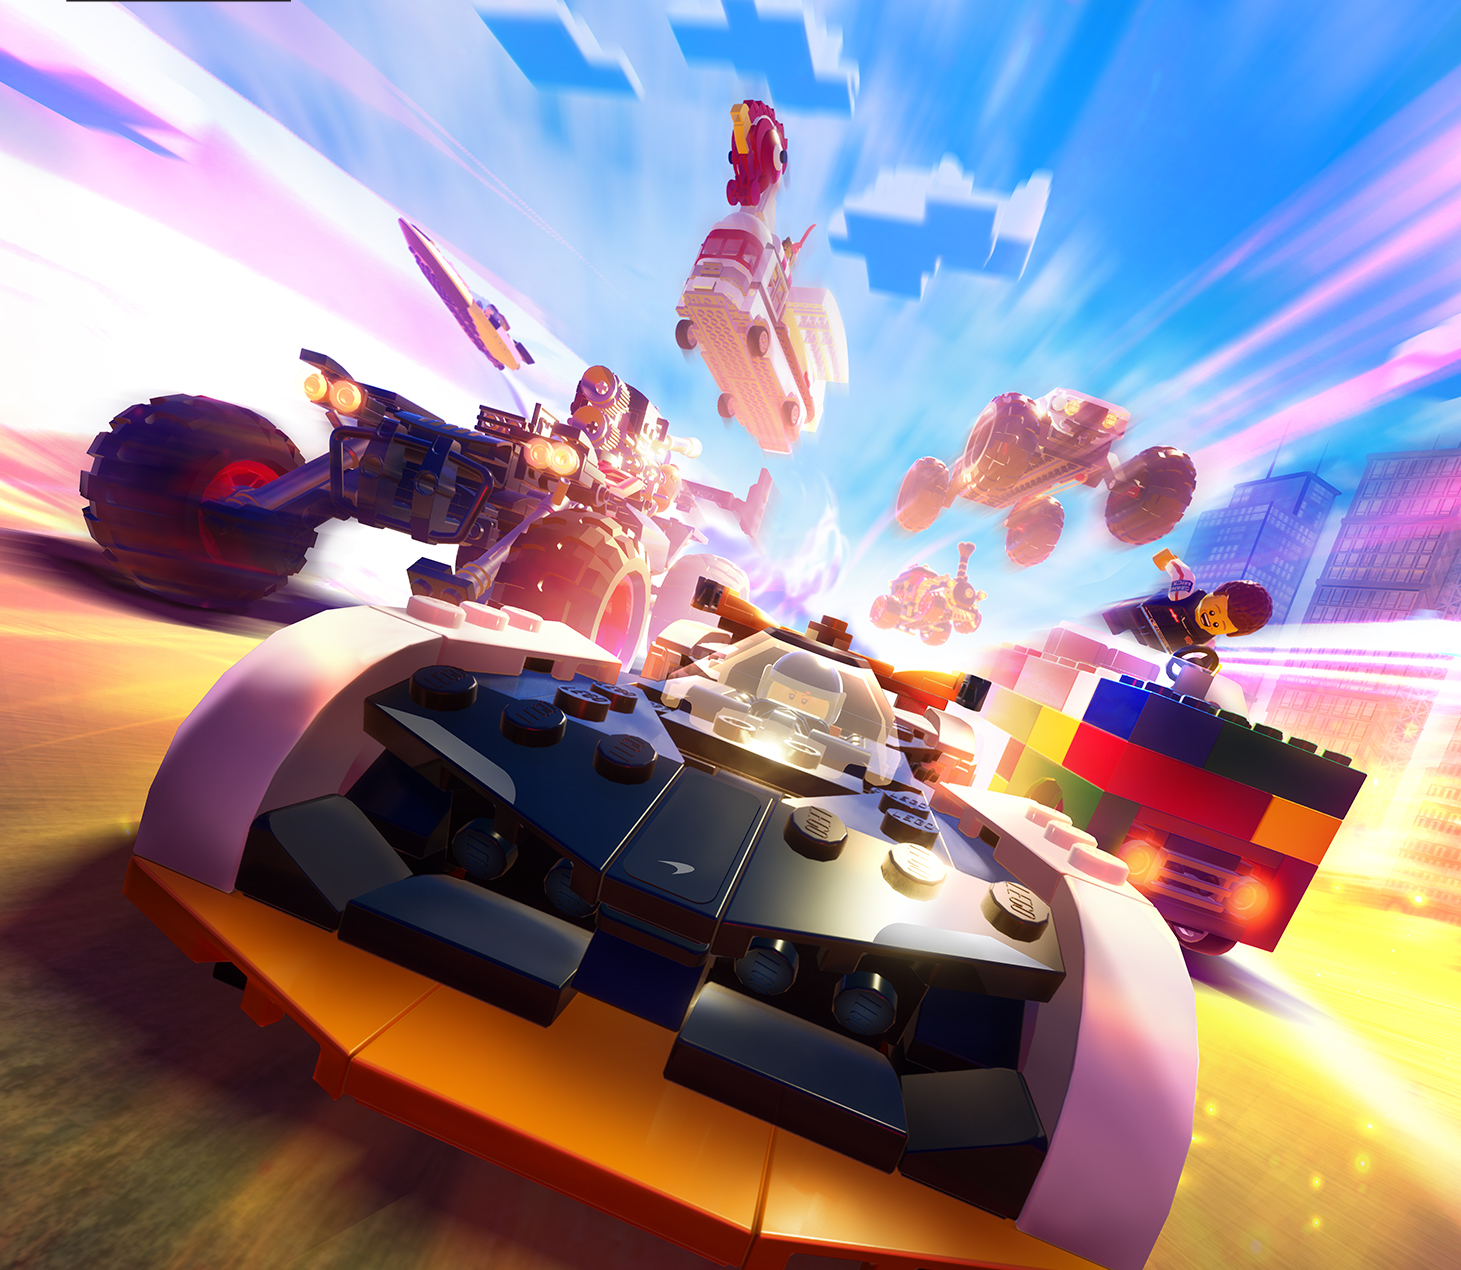 Artwork from Lego 2K Drive, featuring a variety of Lego-made cars racing toward the camera